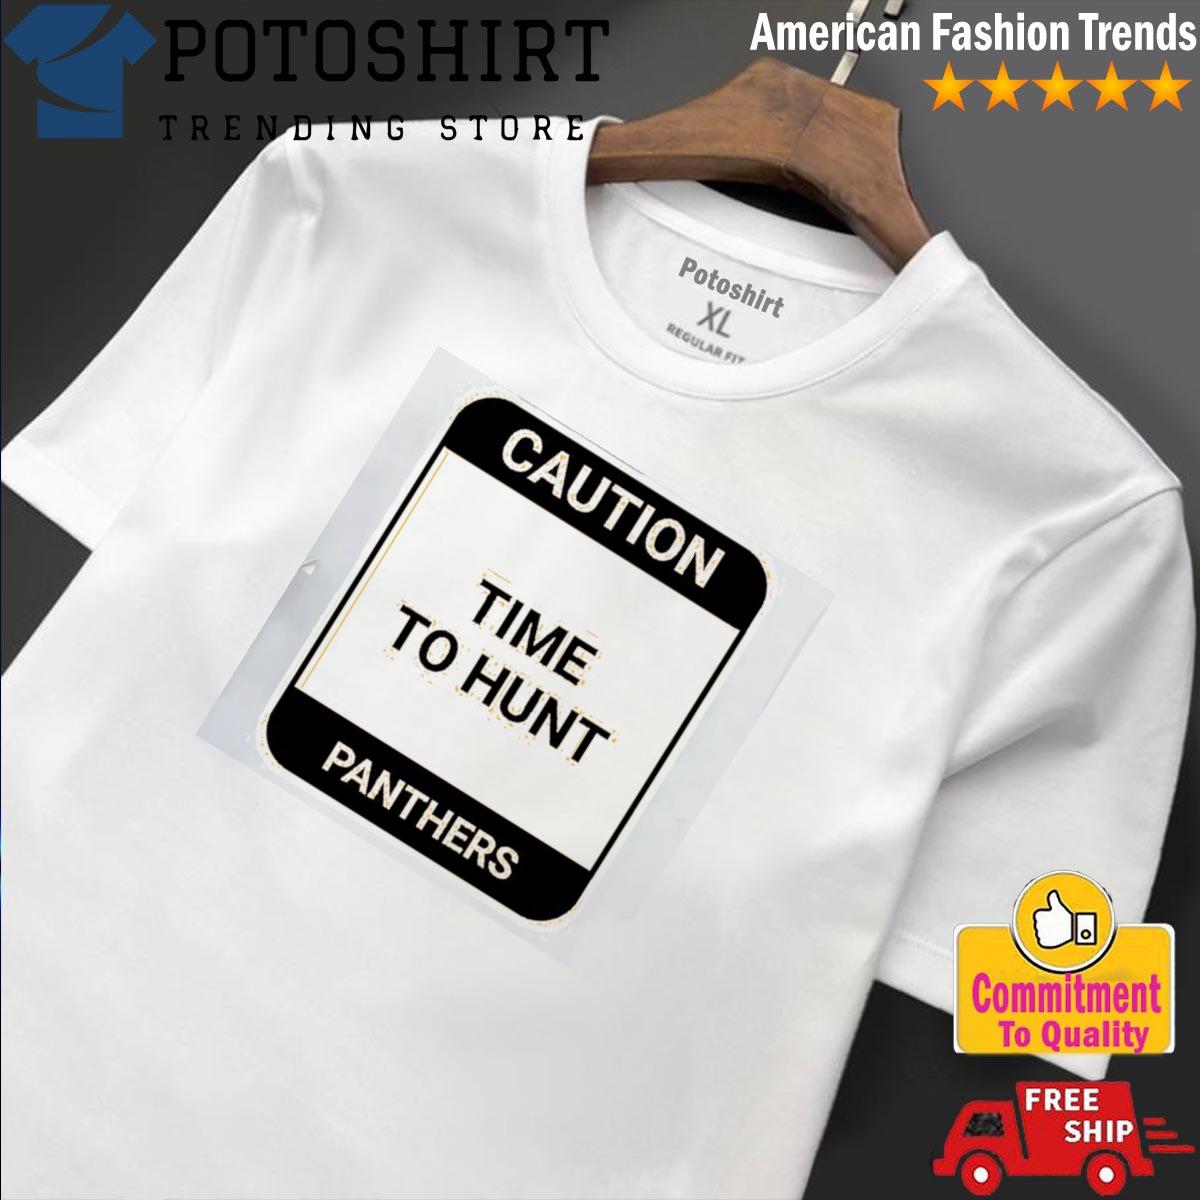 Caution Time To Hunt panther T-shirt